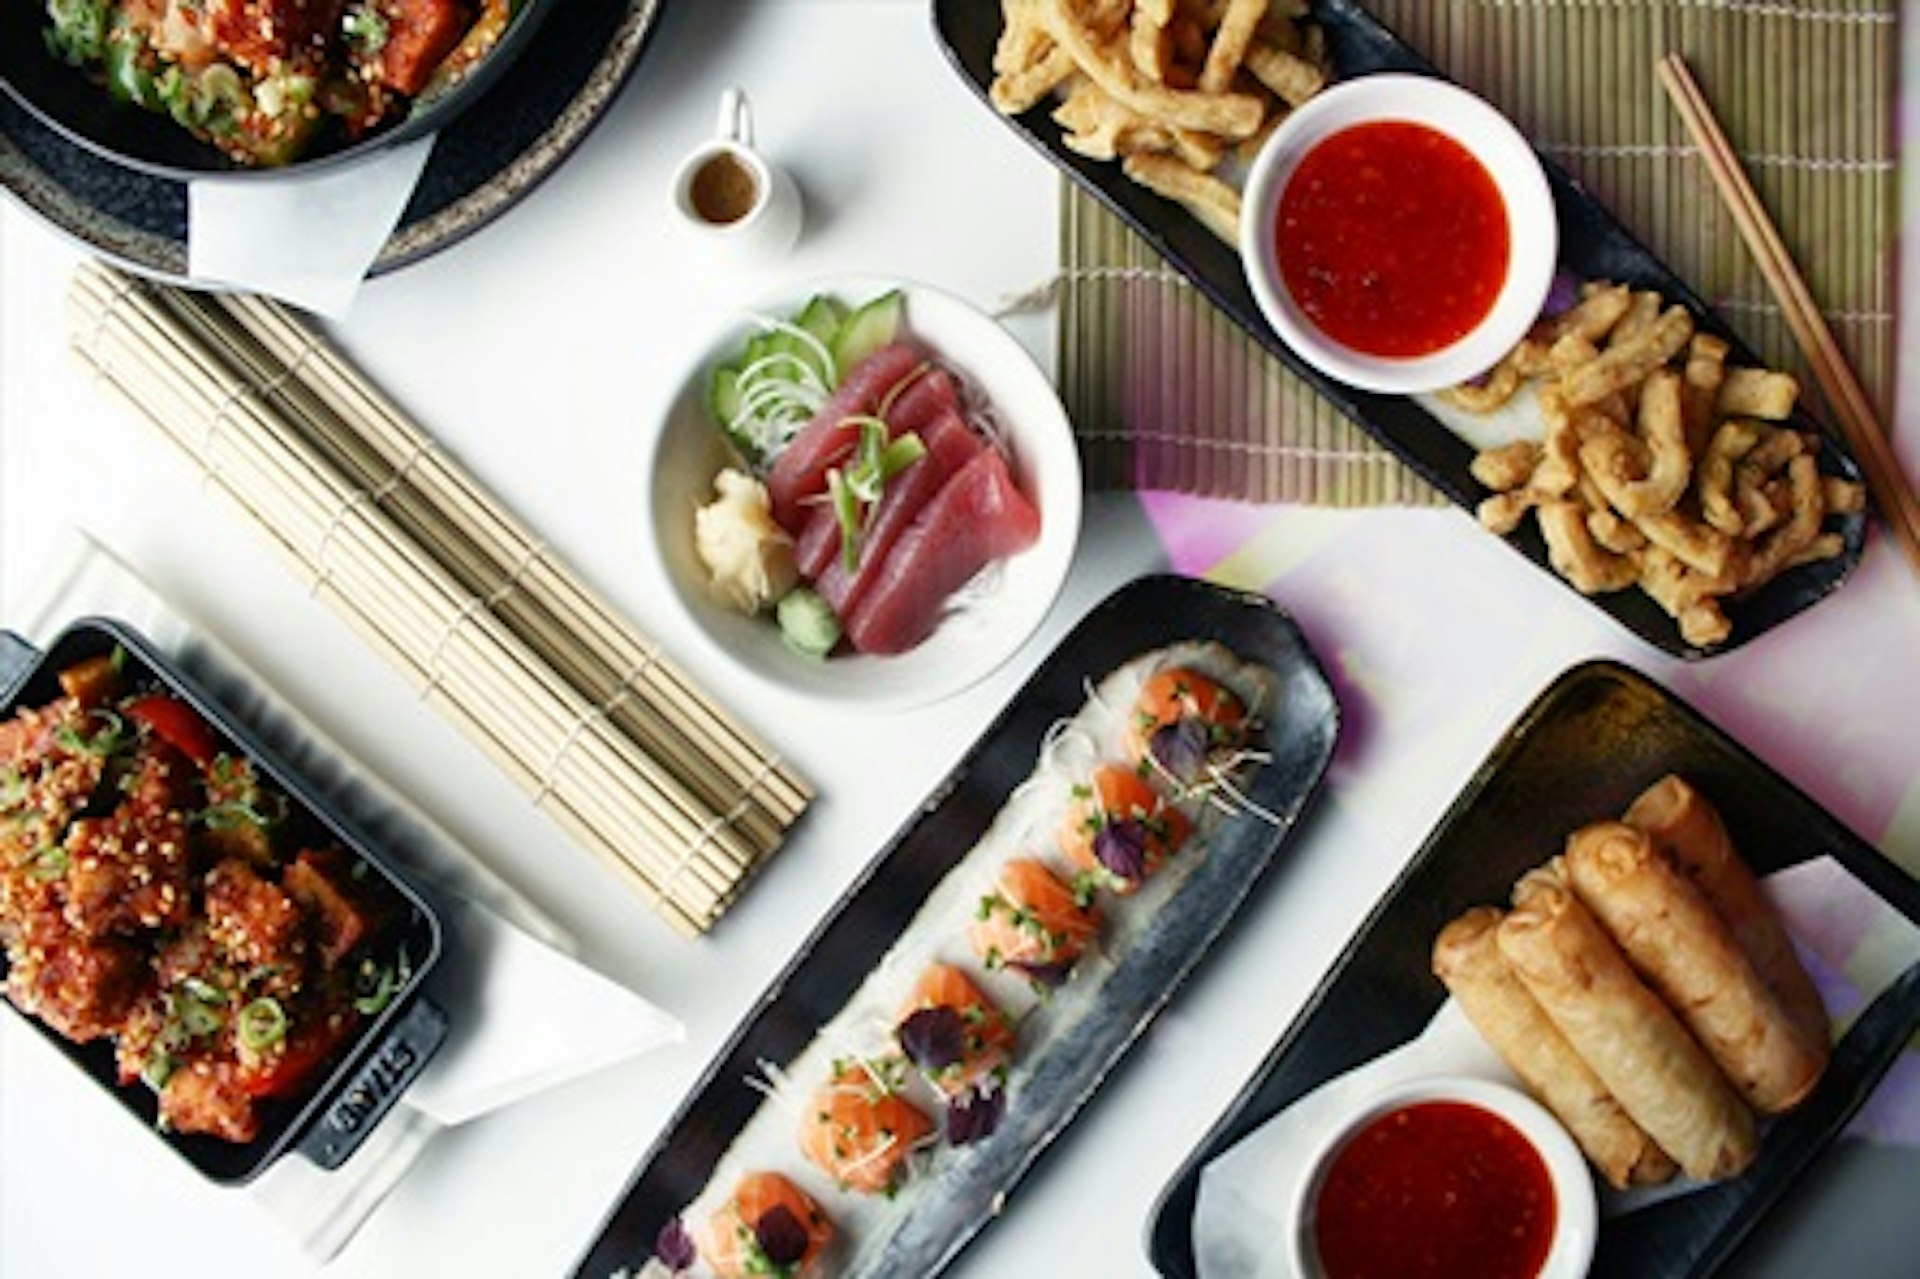 Magic Masterclass with Interactive Pan-Asian Dinner for Two at Inamo, London 4